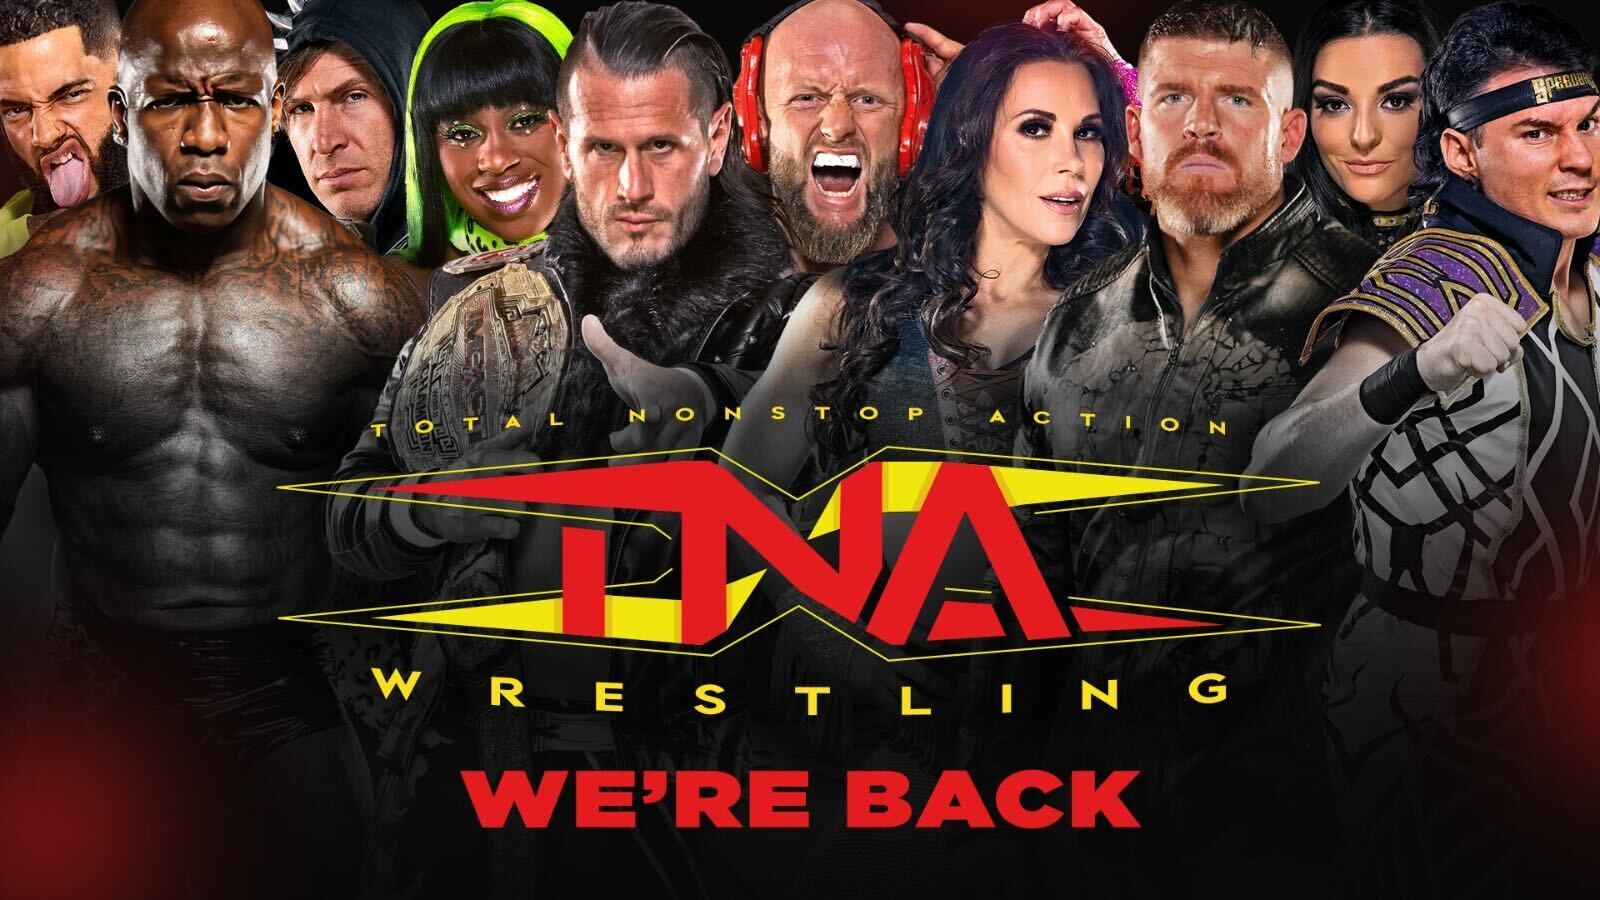 Significant Behind-The-Scenes Changes in TNA’s Daily Running – Who’s at the Helm?, Insights into the Creative Approach, and More.